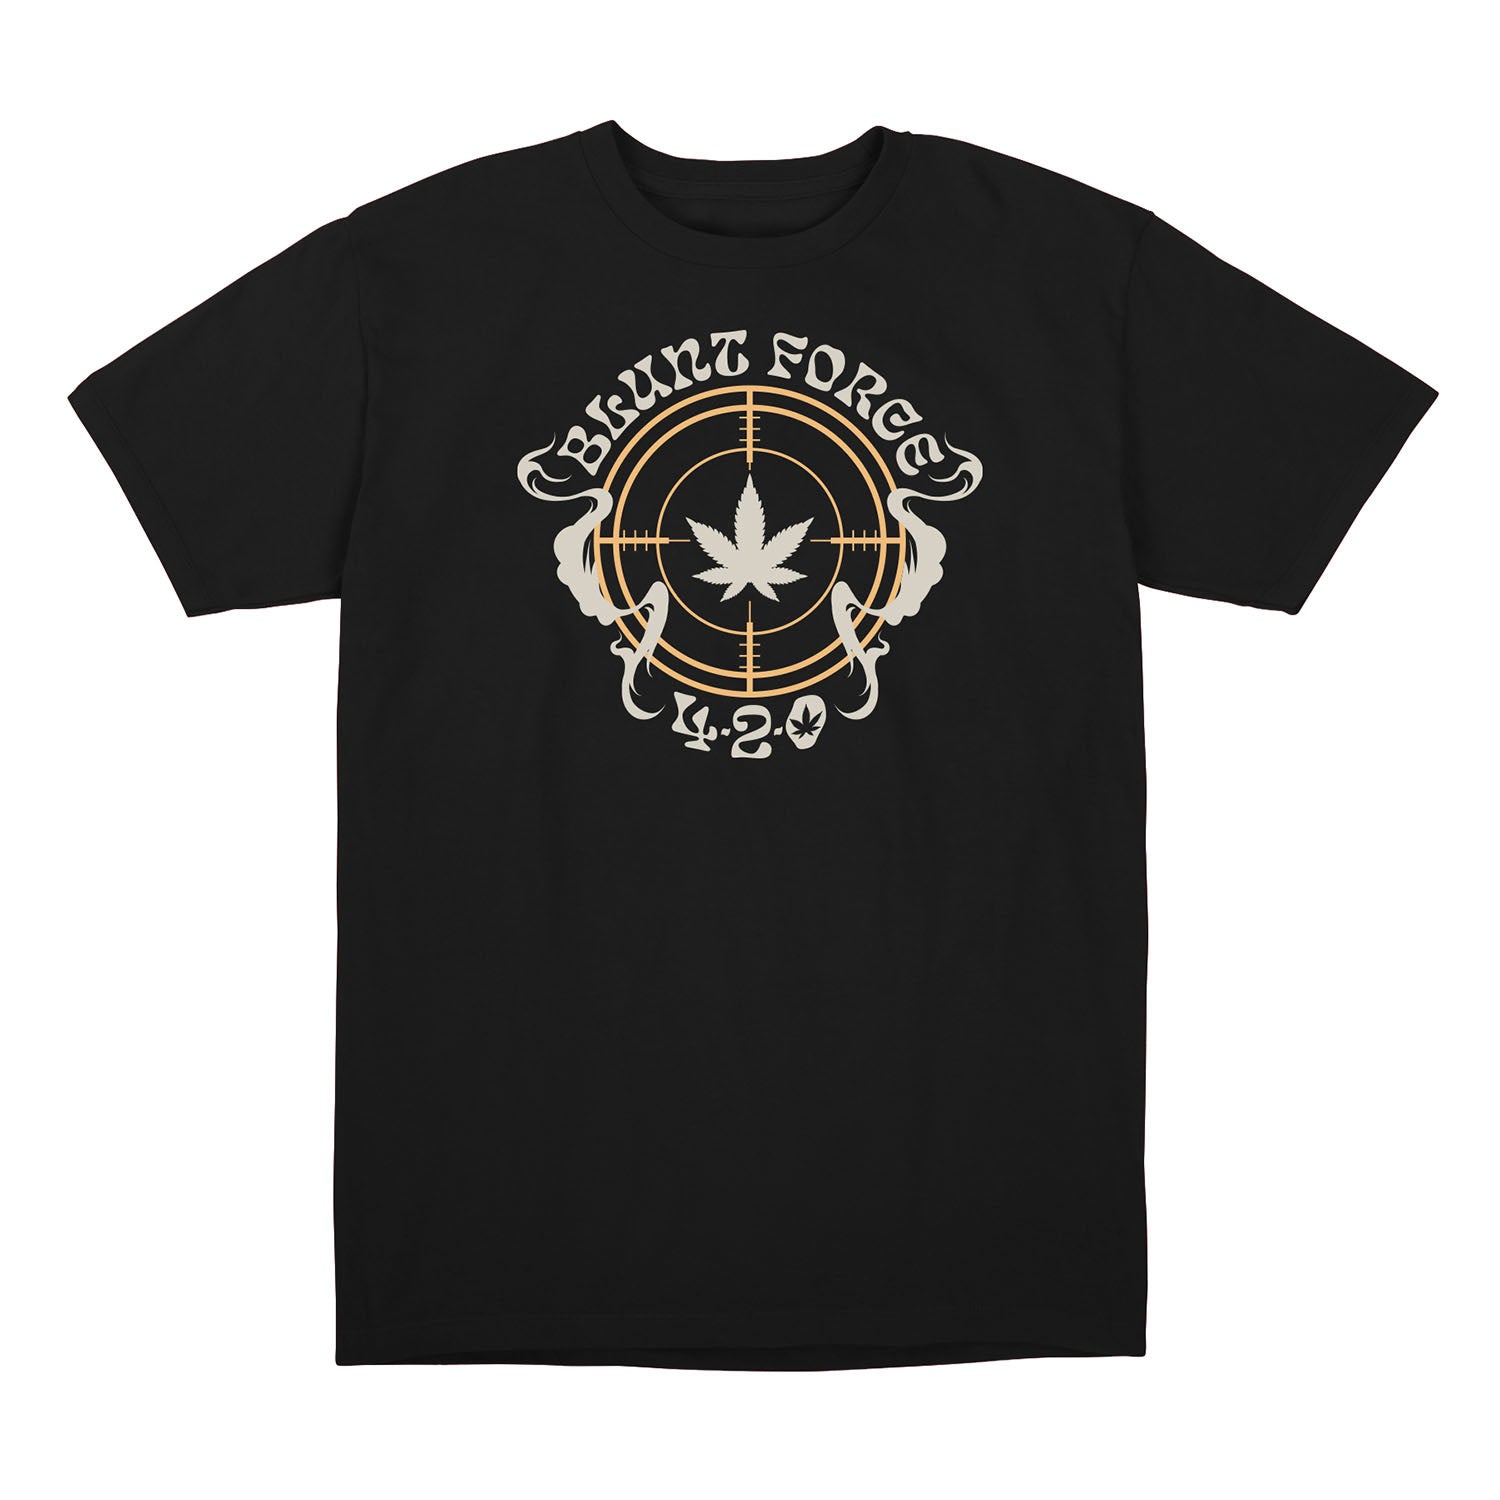 Call of Duty Black Blunt Force T-Shirt - Front View